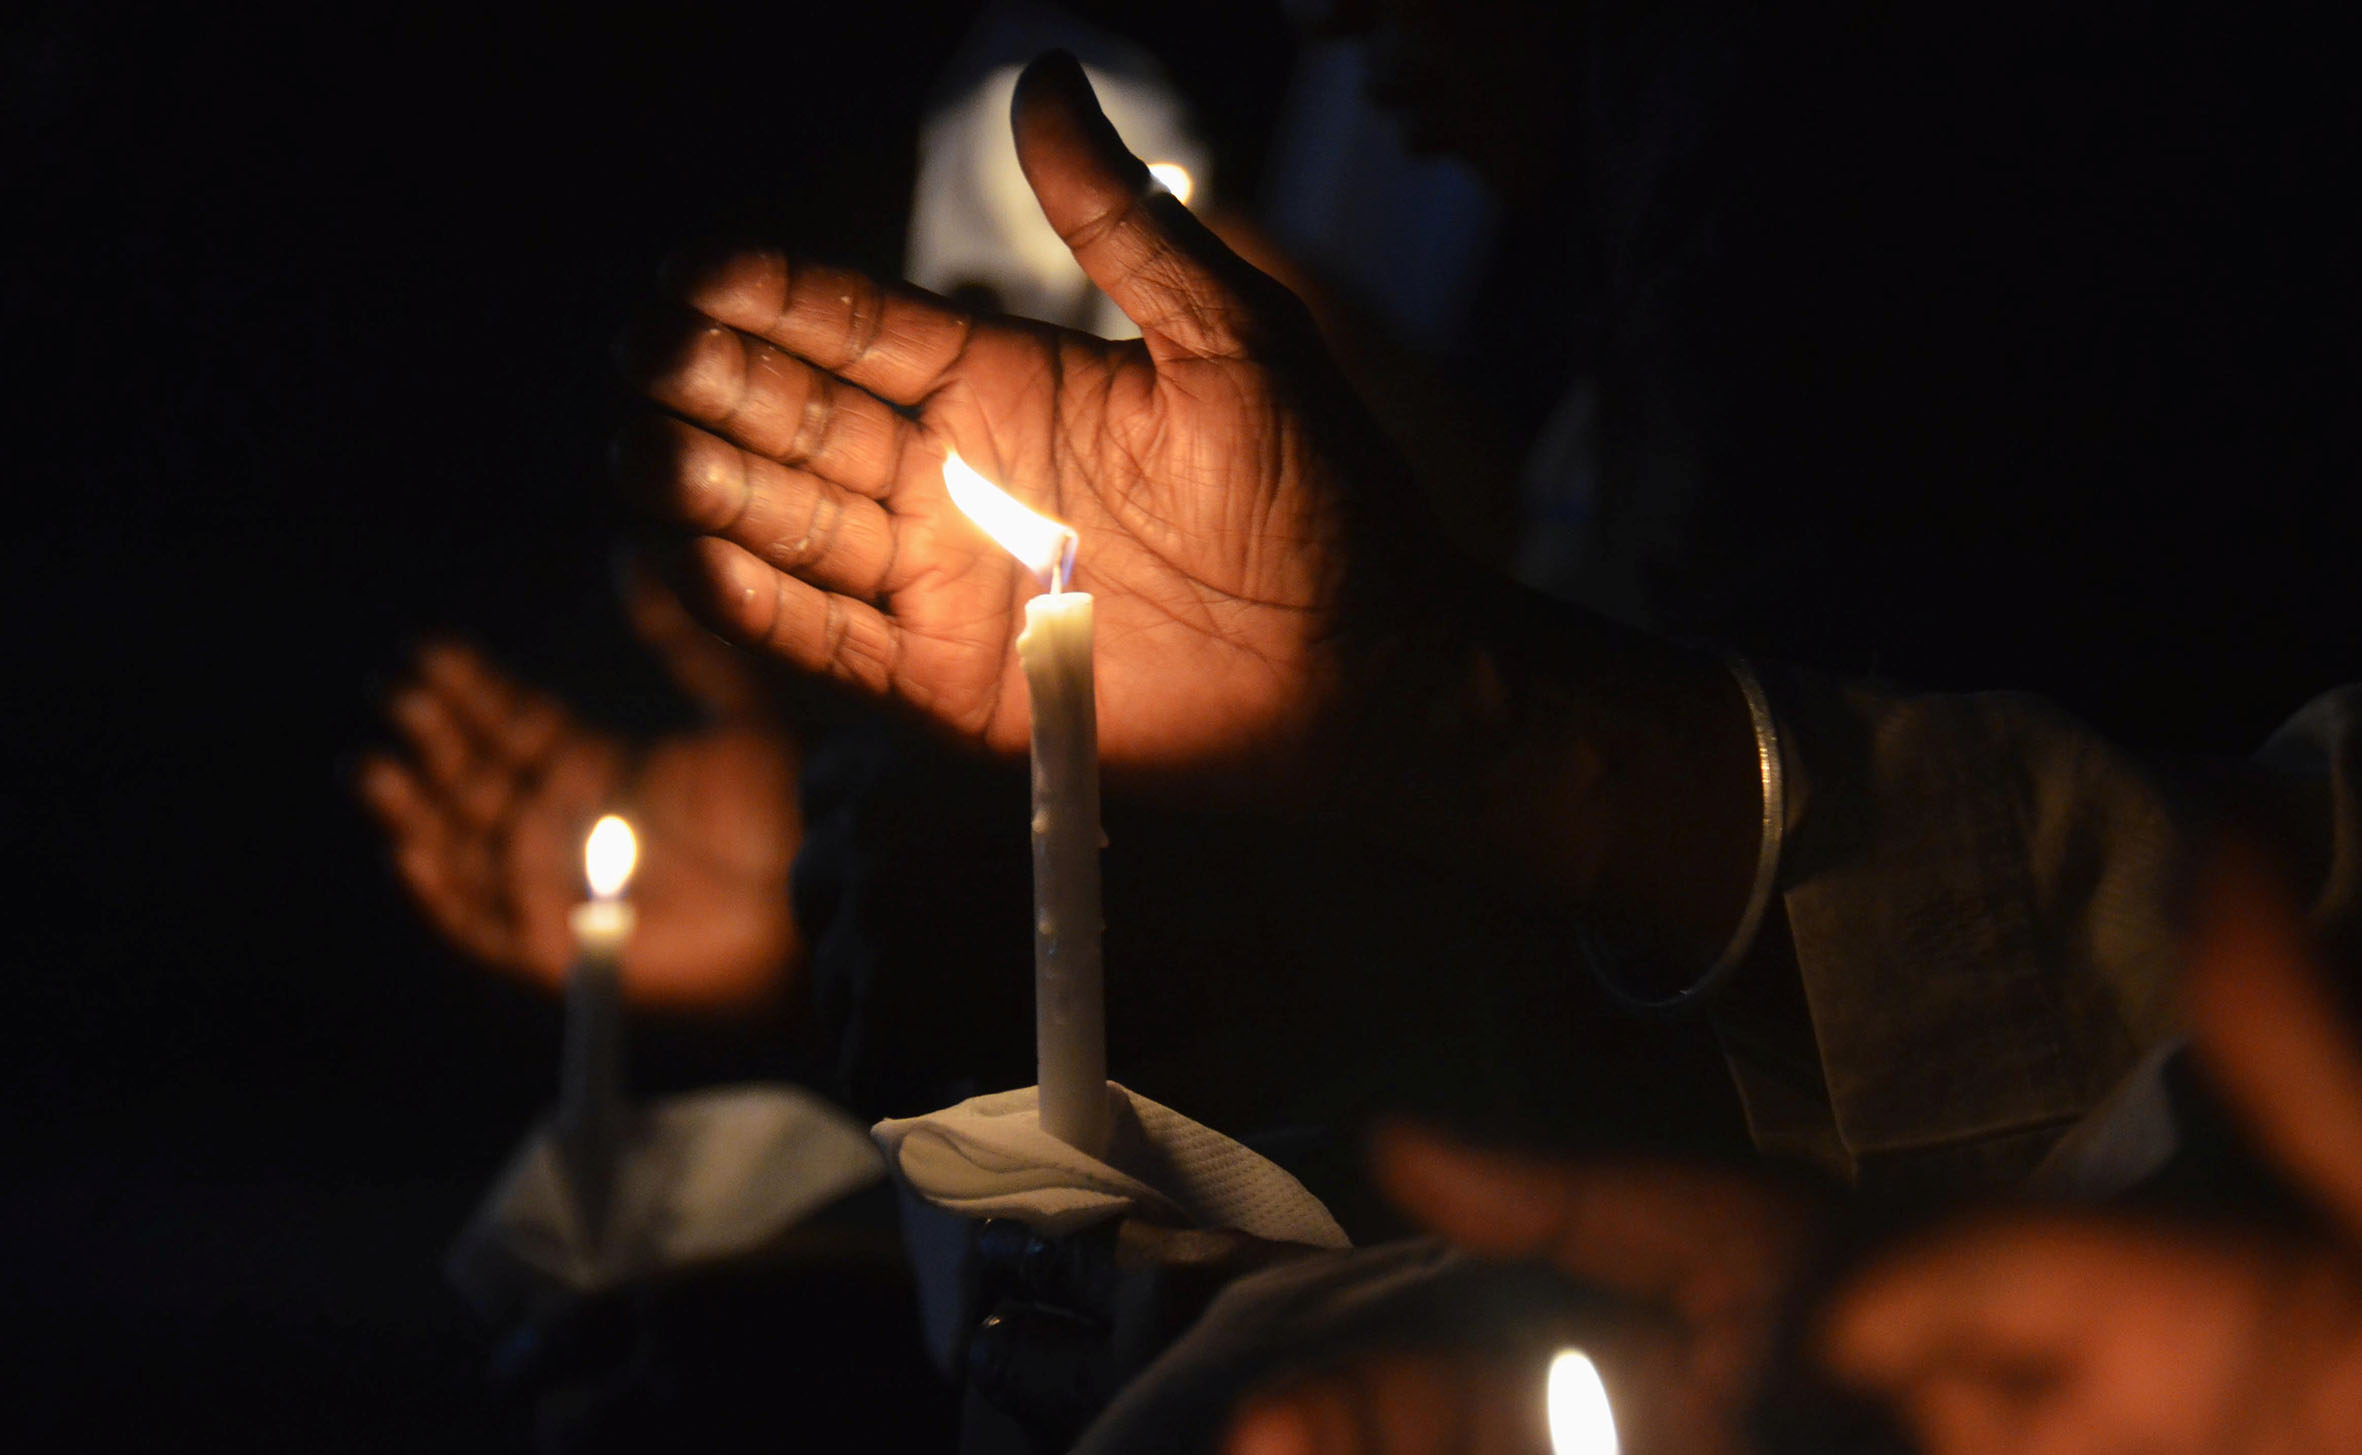 Mourners hold candles during a commemoration event at Kigali Genocide Memorial in 2019. From Thursday, April 7, Rwandans and friends of Rwanda in and outside the country will start the 28th Commemoration of the Genocide against the Tutsi. / Photo: Sam Ngendahimana.